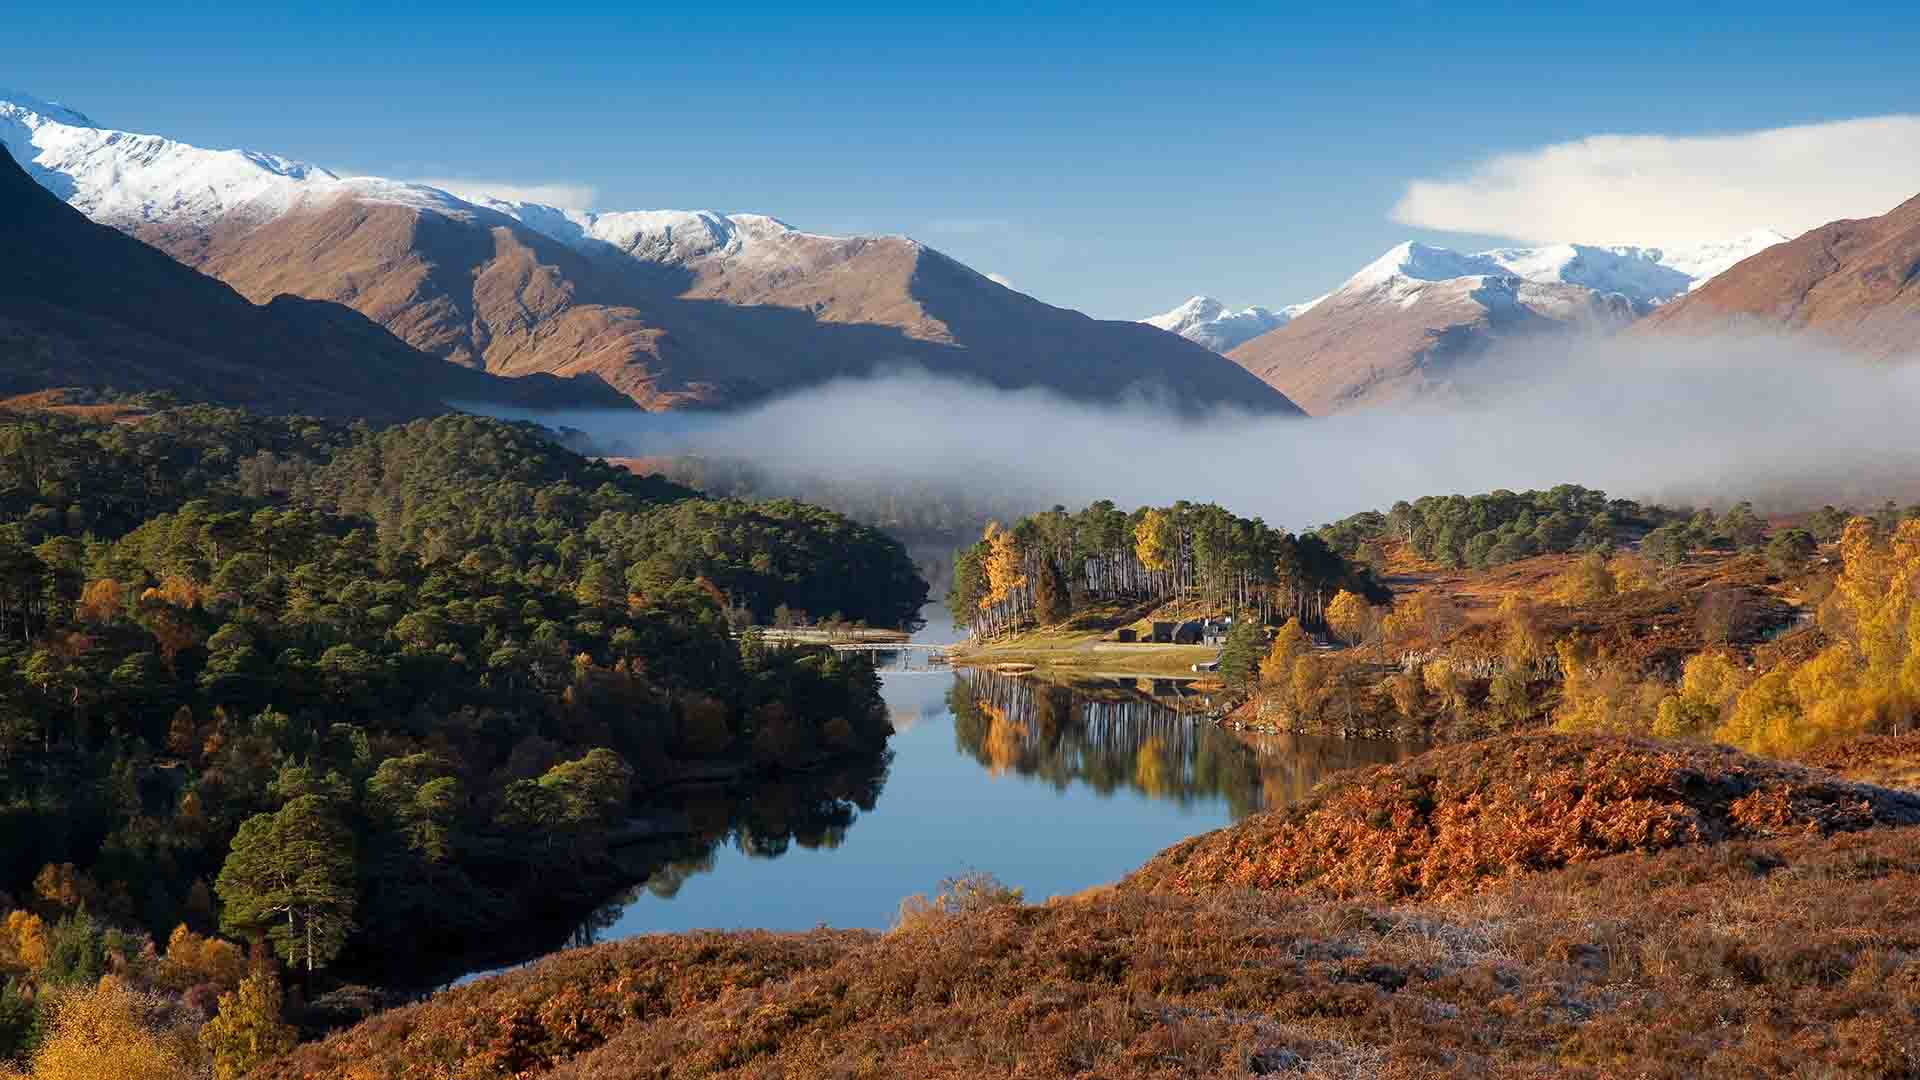 A view of Glen Affric, near Kingsmills Hotel, Inverness